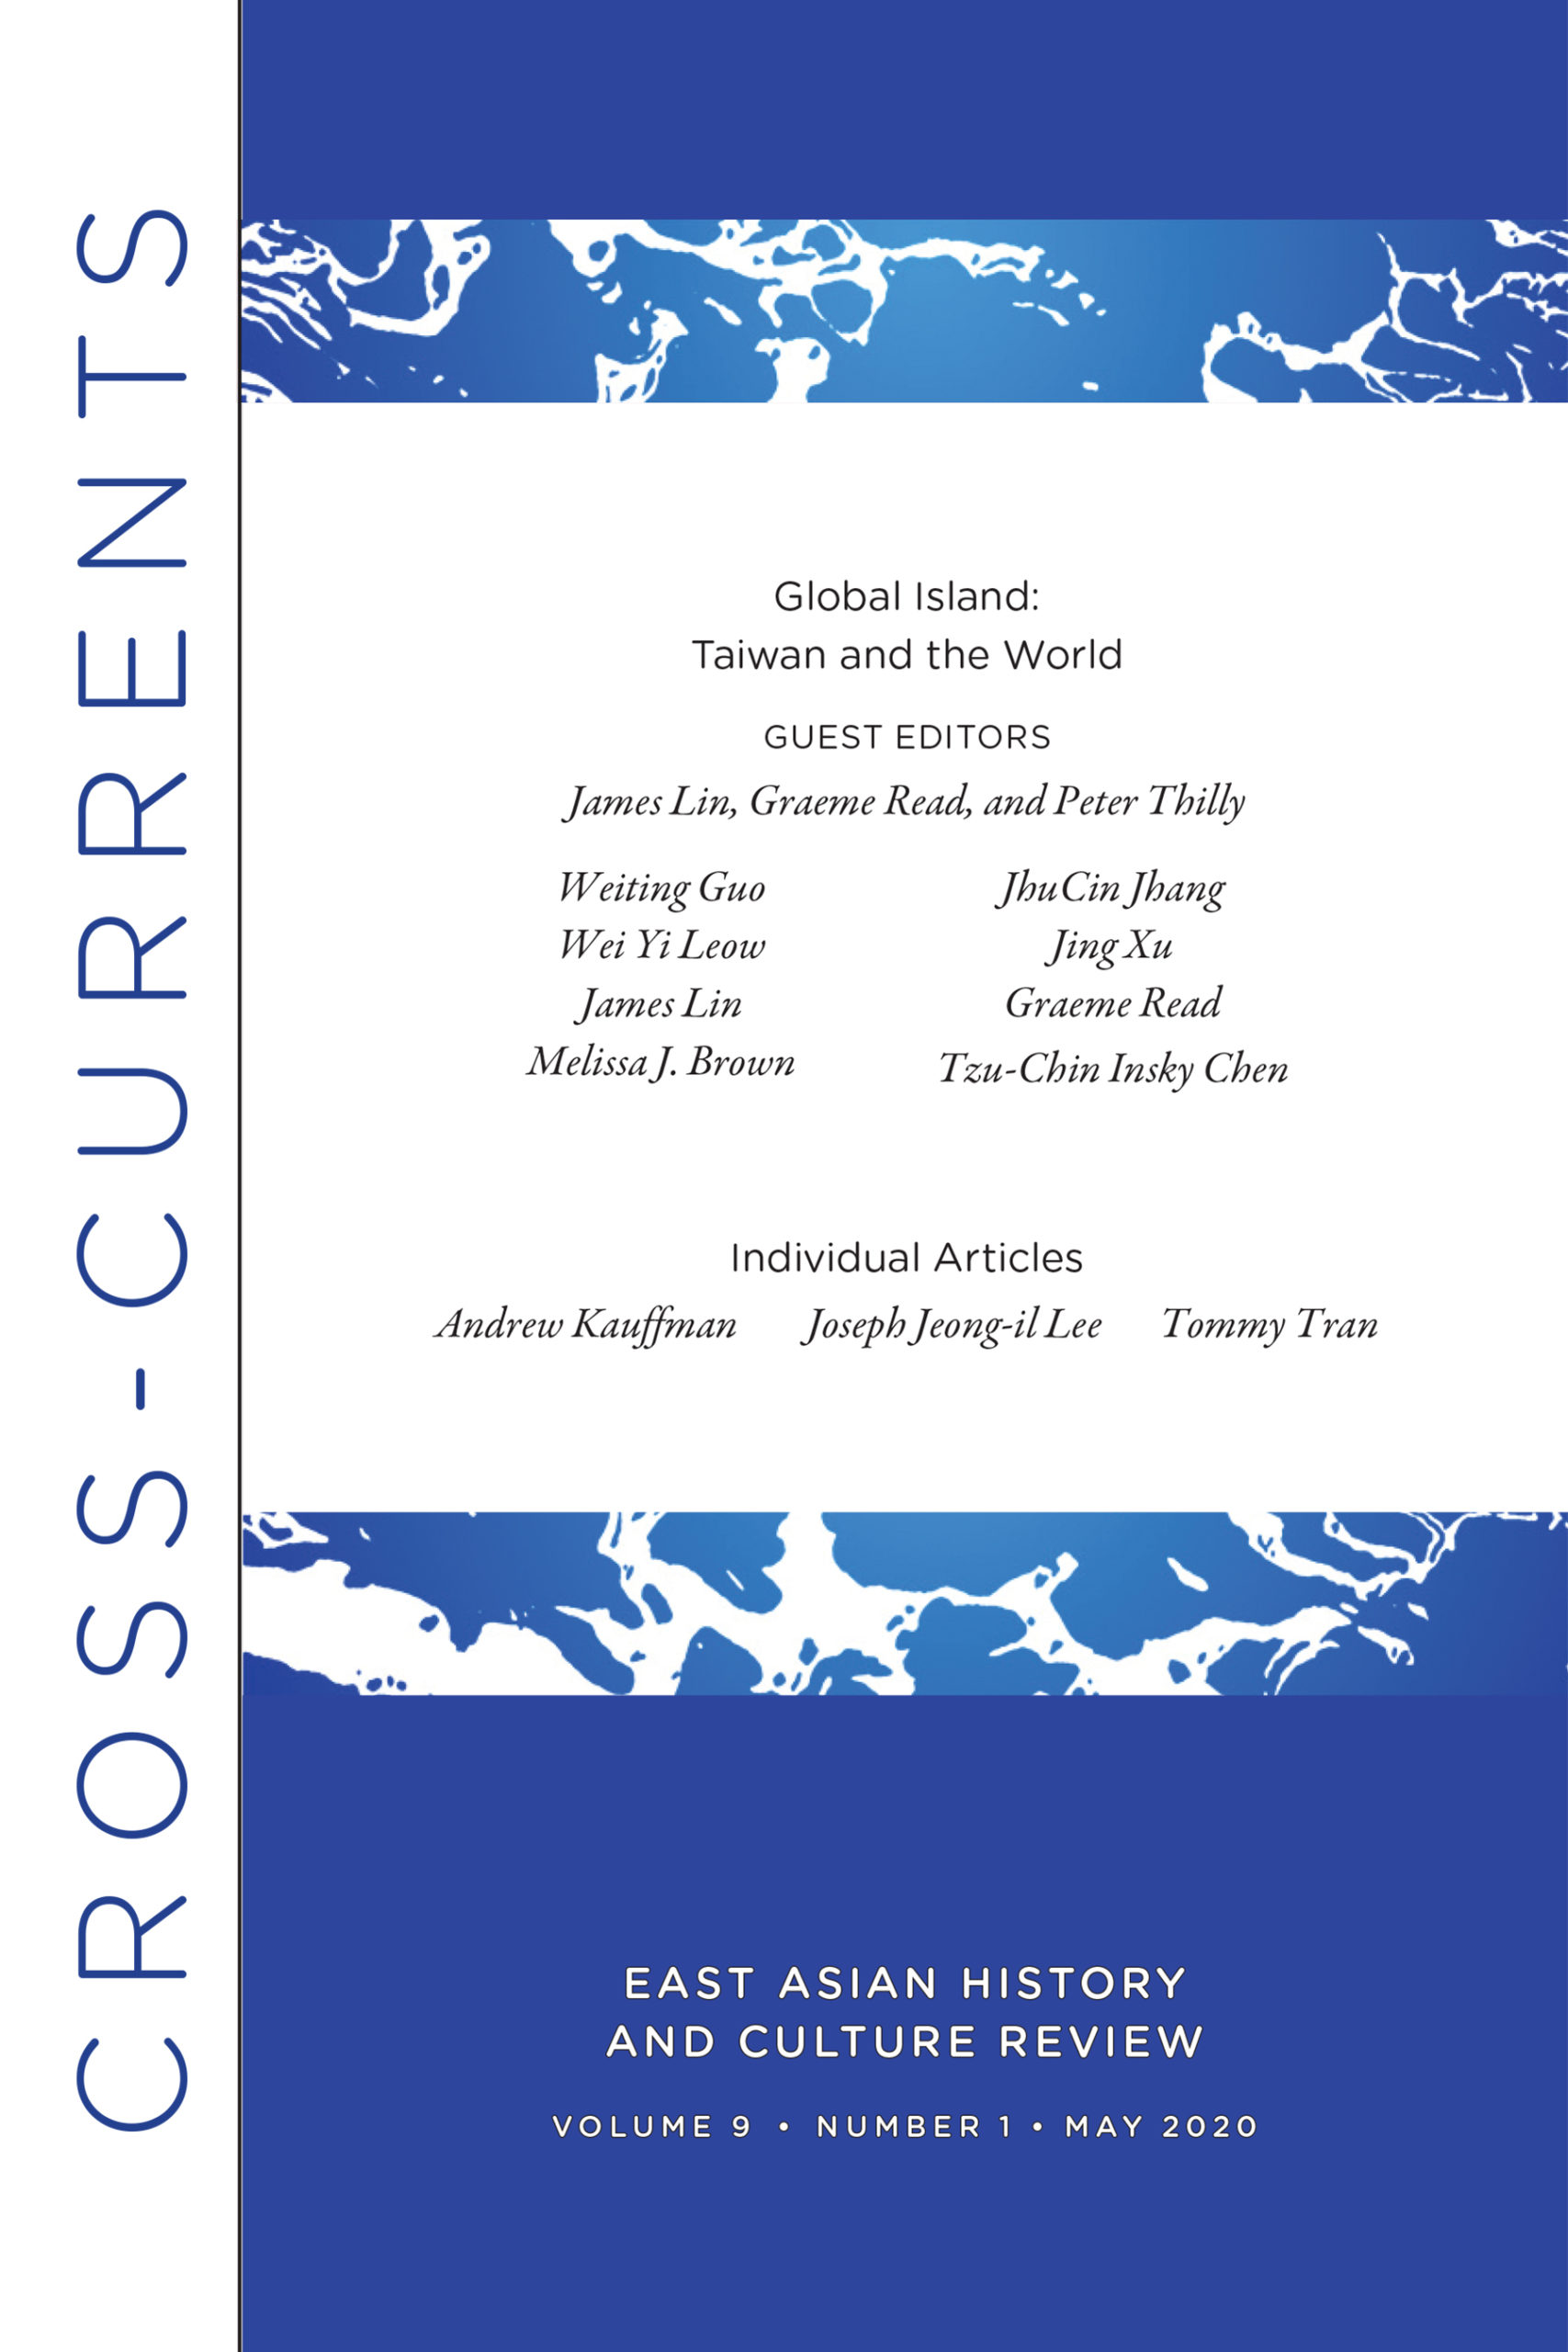 New Journal Issues: Asian Theatre Journal, Cross-Currents, Journal of Korean Religions + More (June 2020)